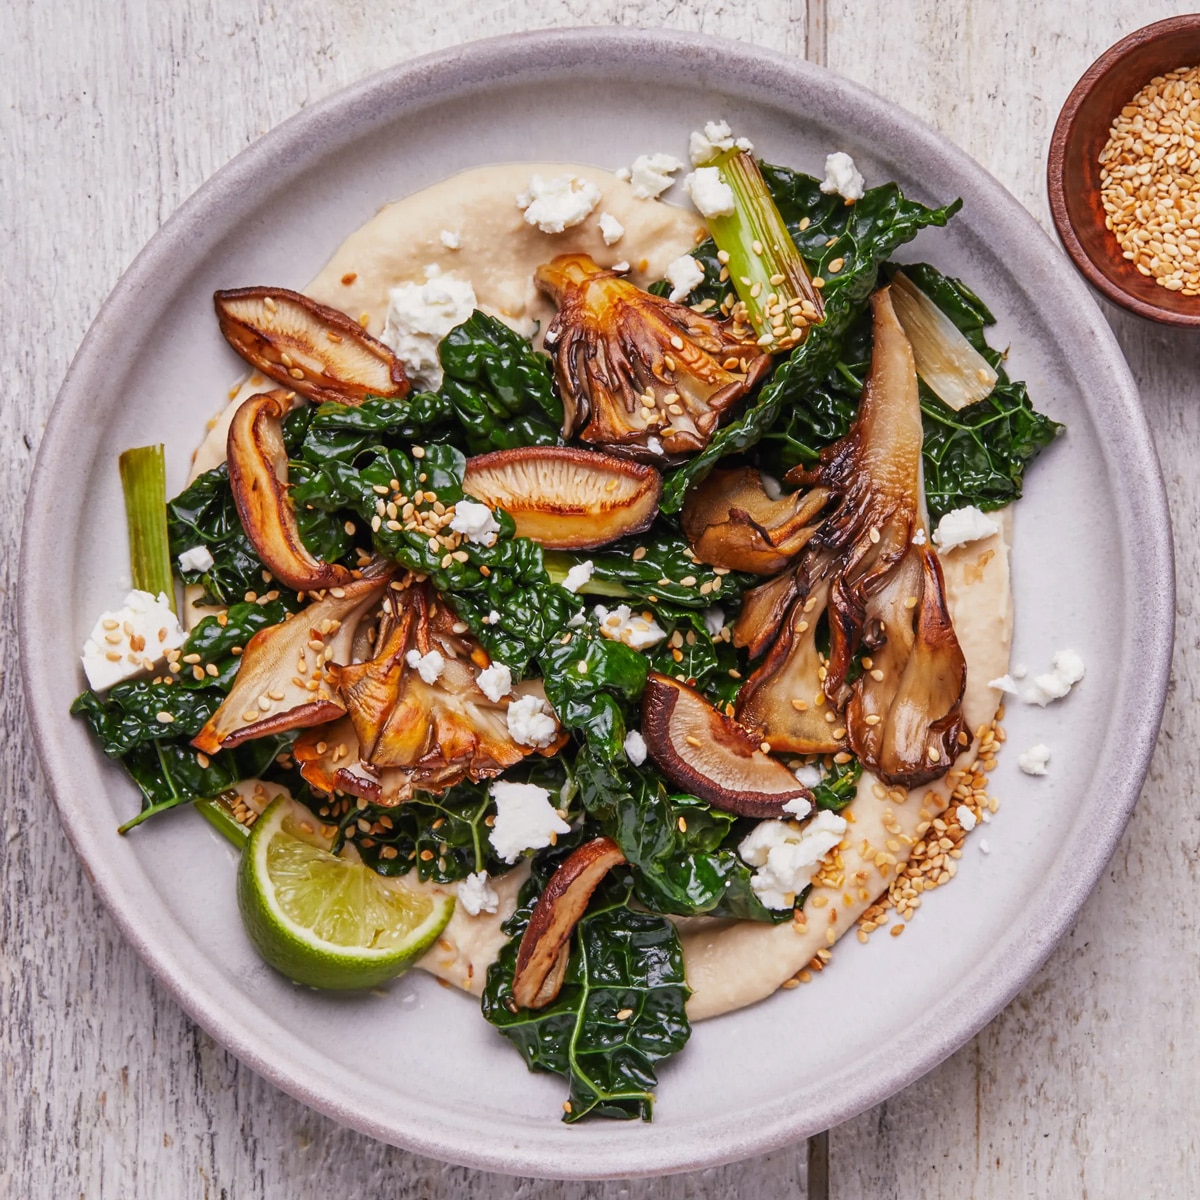 Crispy mushrooms with creamy white beans and kale